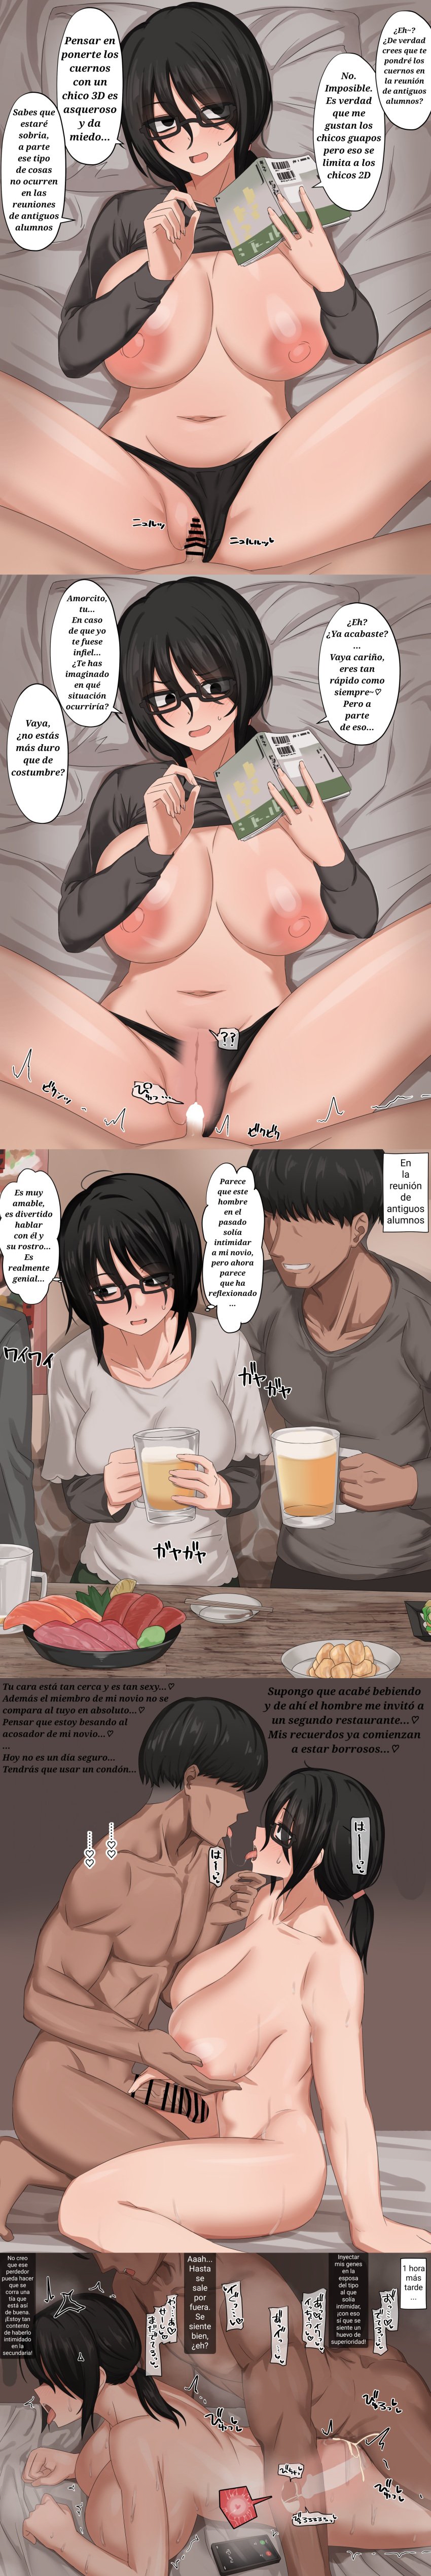 1girls 2boys 5koma beer big_breasts black_eyes black_hair black_underwear book bored bored_sex calling cellphone censored cheating cheating_female cheating_girlfriend cheating_wife comic cuckold cuckolding cum_in_pussy cum_in_uterus dark-skinned_male dark_skin disappointed disappointing disappointing_sex disinterested disinterested_sex doggy_style drunk drunk_sex enari exposed_nipples fake_smile faking_joy faking_pleasure french_kiss french_kissing from_behind from_behind_position glasses handjob impregnation impregnation_risk incoming_call kissing light-skinned_female light-skinned_male light_skin missionary_position netorare ntr nude nude_female nude_male paternity_fraud phone phone_call premature_ejaculation premature_ejaculation_shaming premature_orgasm small_penis small_penis_humiliation smartphone snacks spanish_text spanish_translation text tied_hair tongue_kiss tongue_kissing translation_request unamused unamused_sex unenthusiastic unenthusiastic_sex unsatisfied voluptuous voluptuous_female x-ray